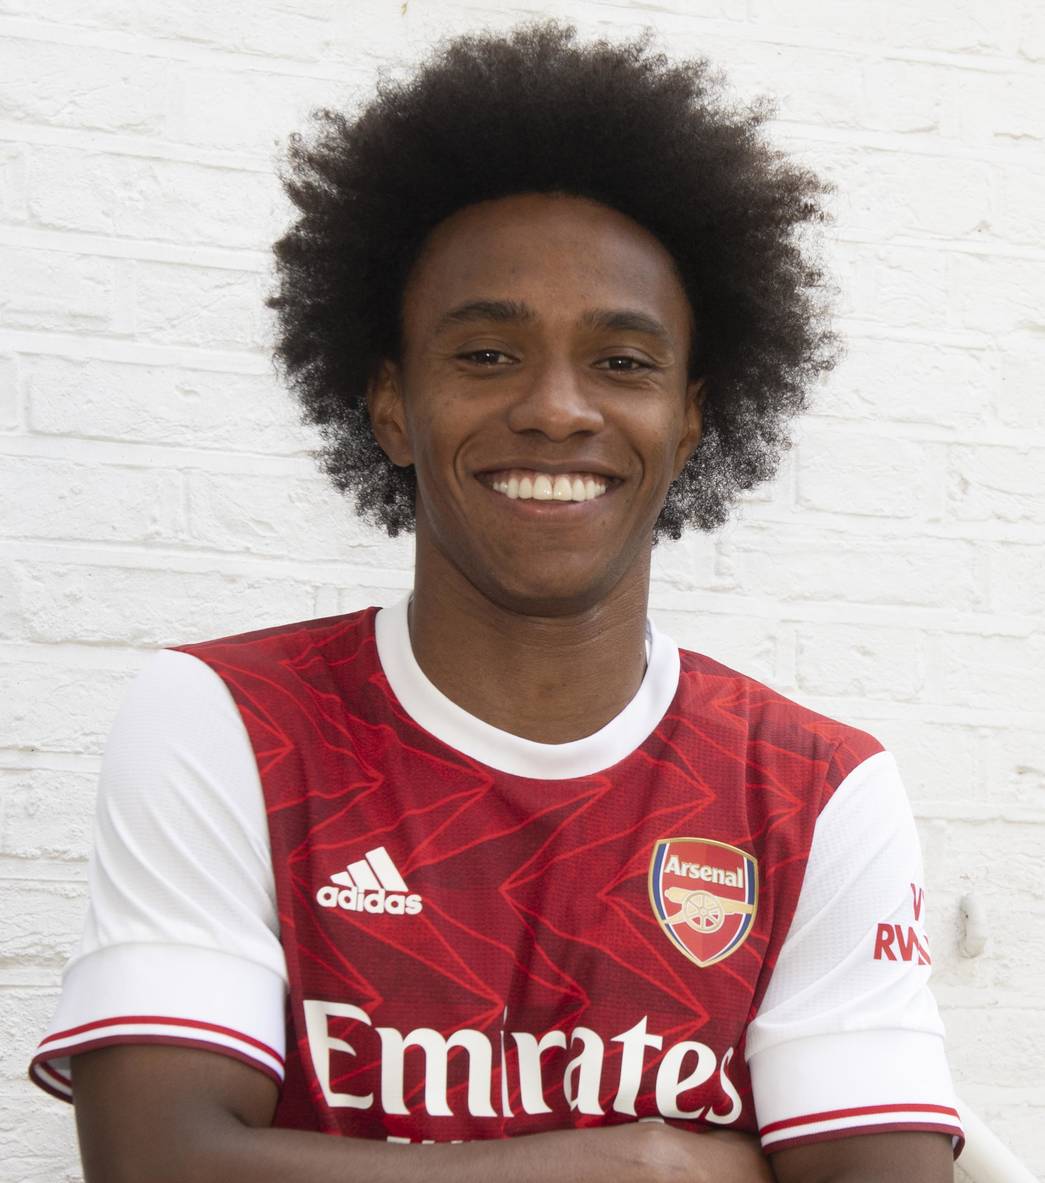 Willian after signing for Arsenal (Photo via Arsenal.com)